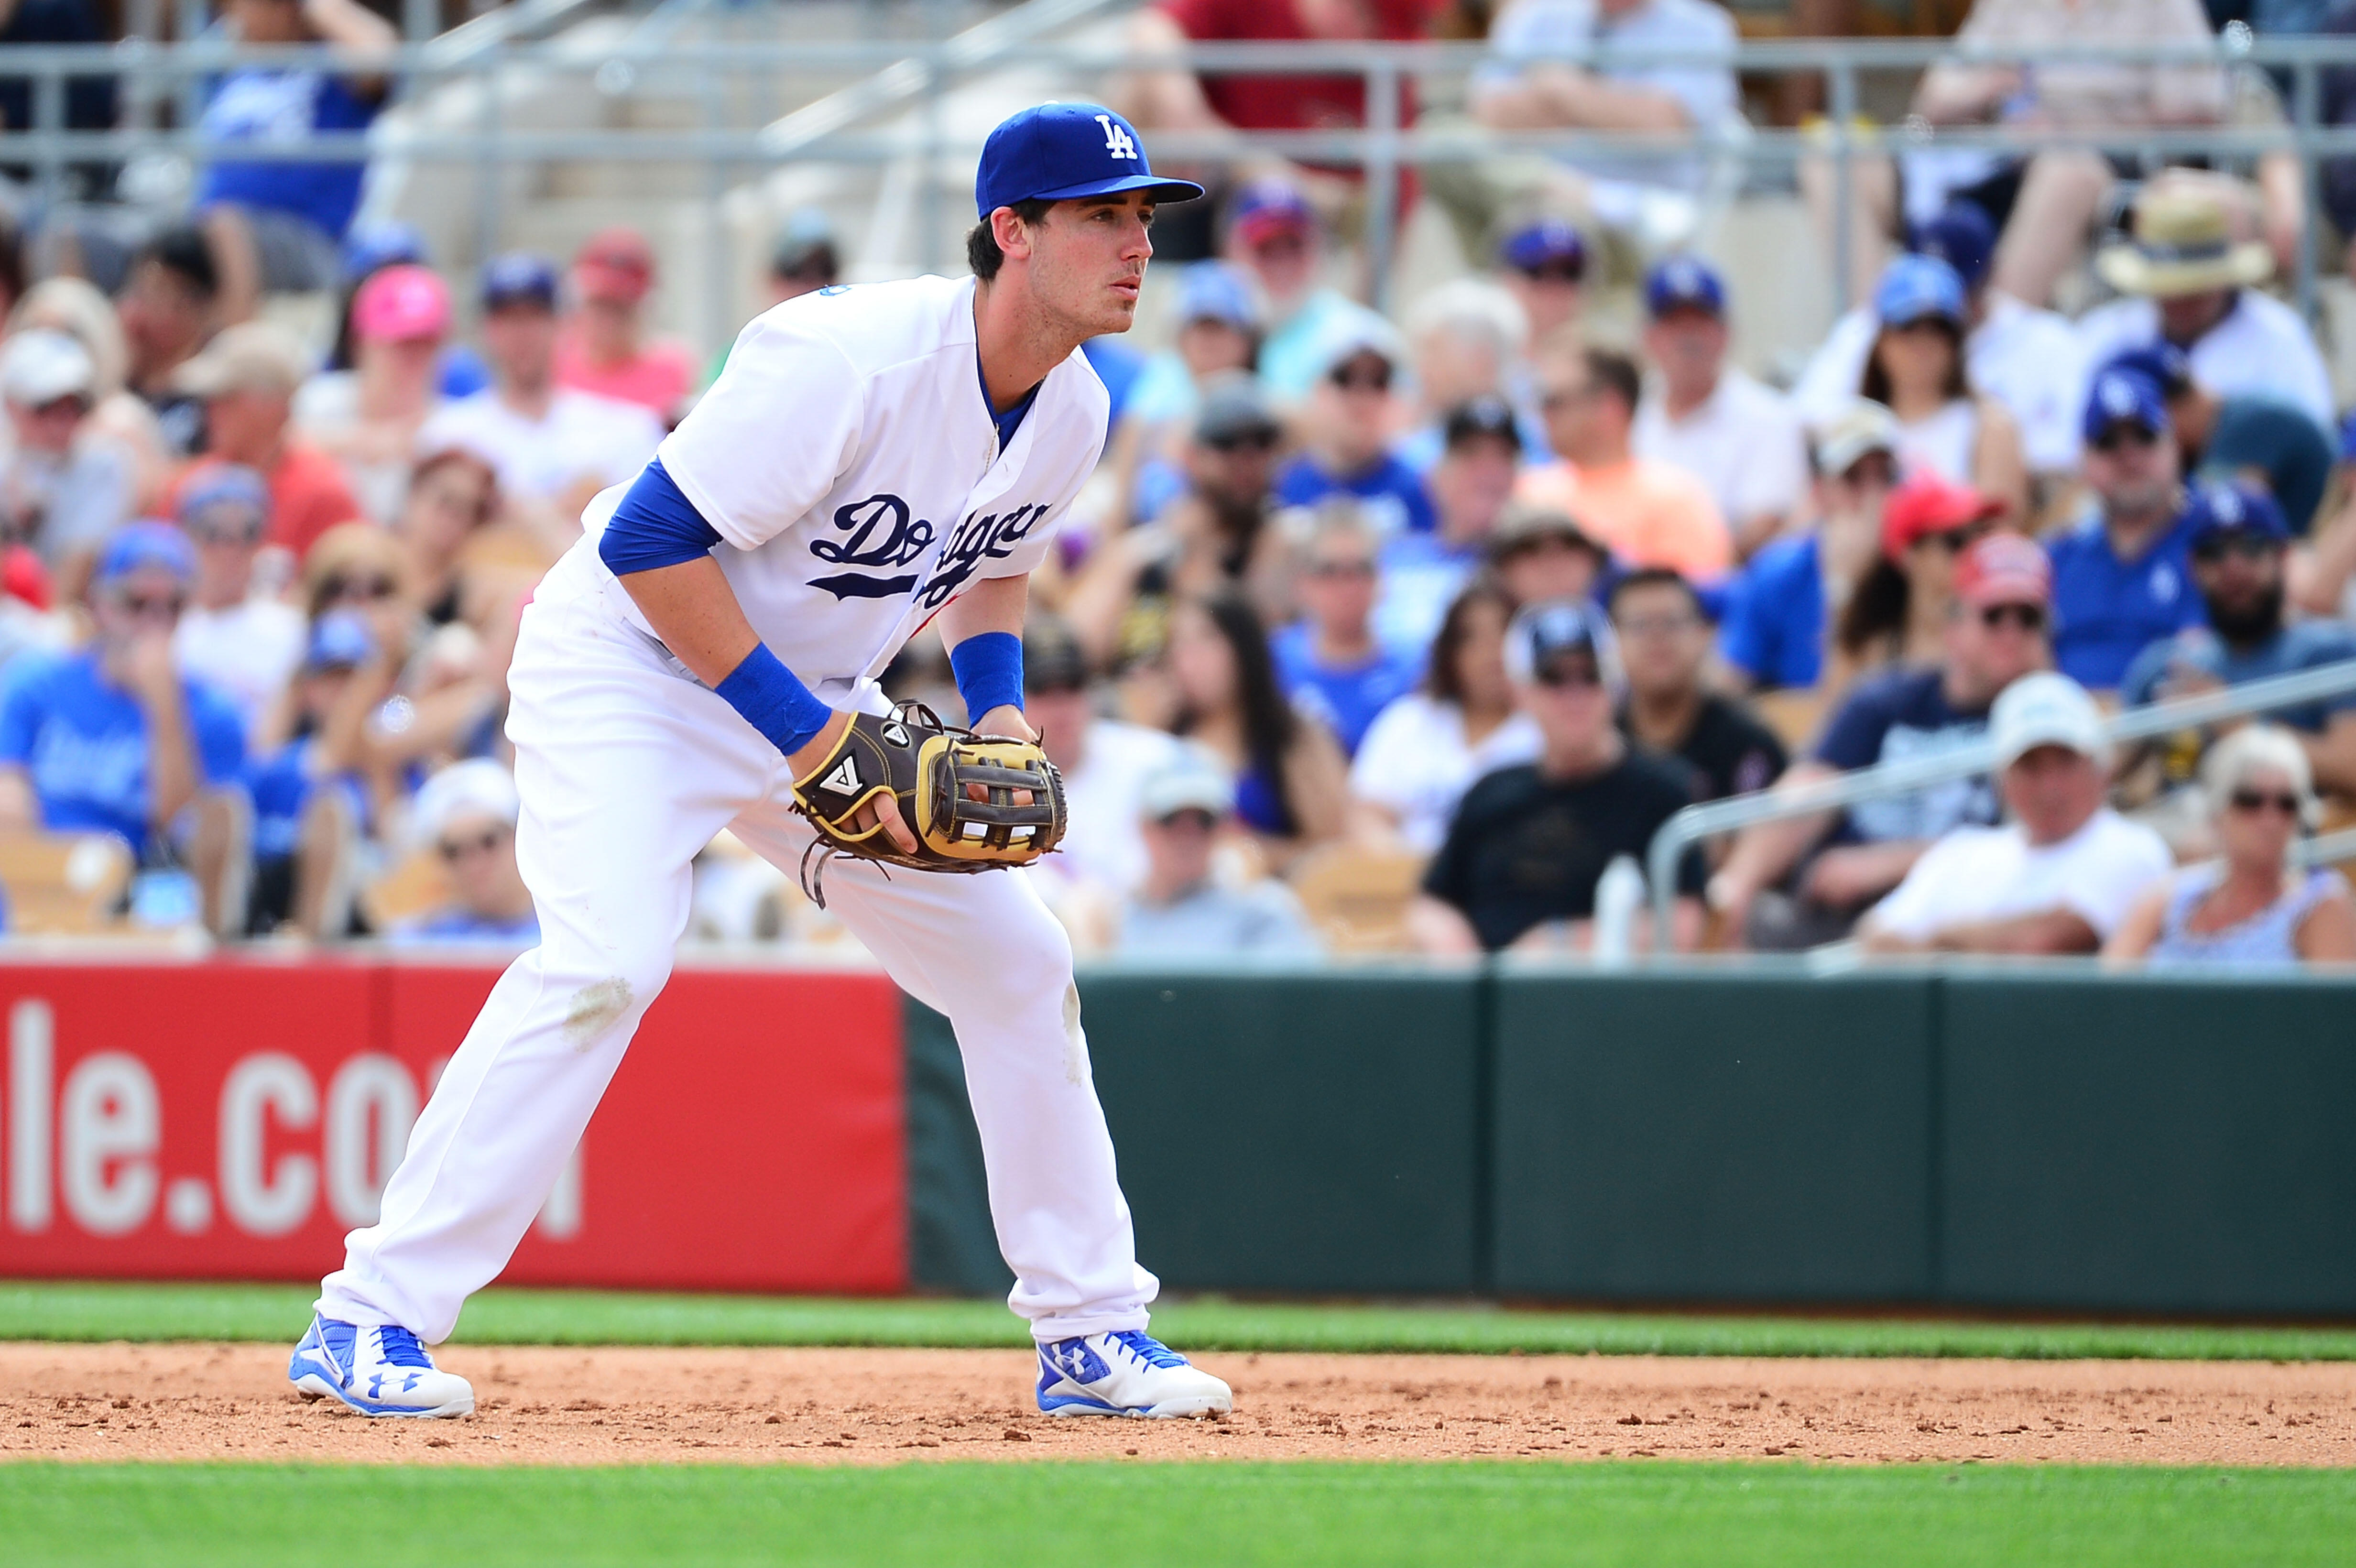 GLENDALE, AZ - MARCH 05:  Cody Bellinger #61 of the Los Angeles Dodgers in action during the spring training game against the Arizona Diamondbacks at Camelback Ranch on March 5, 2016 in Glendale, Arizona.  The Dodgers won 7-2.  (Photo by Jennifer Stewart/